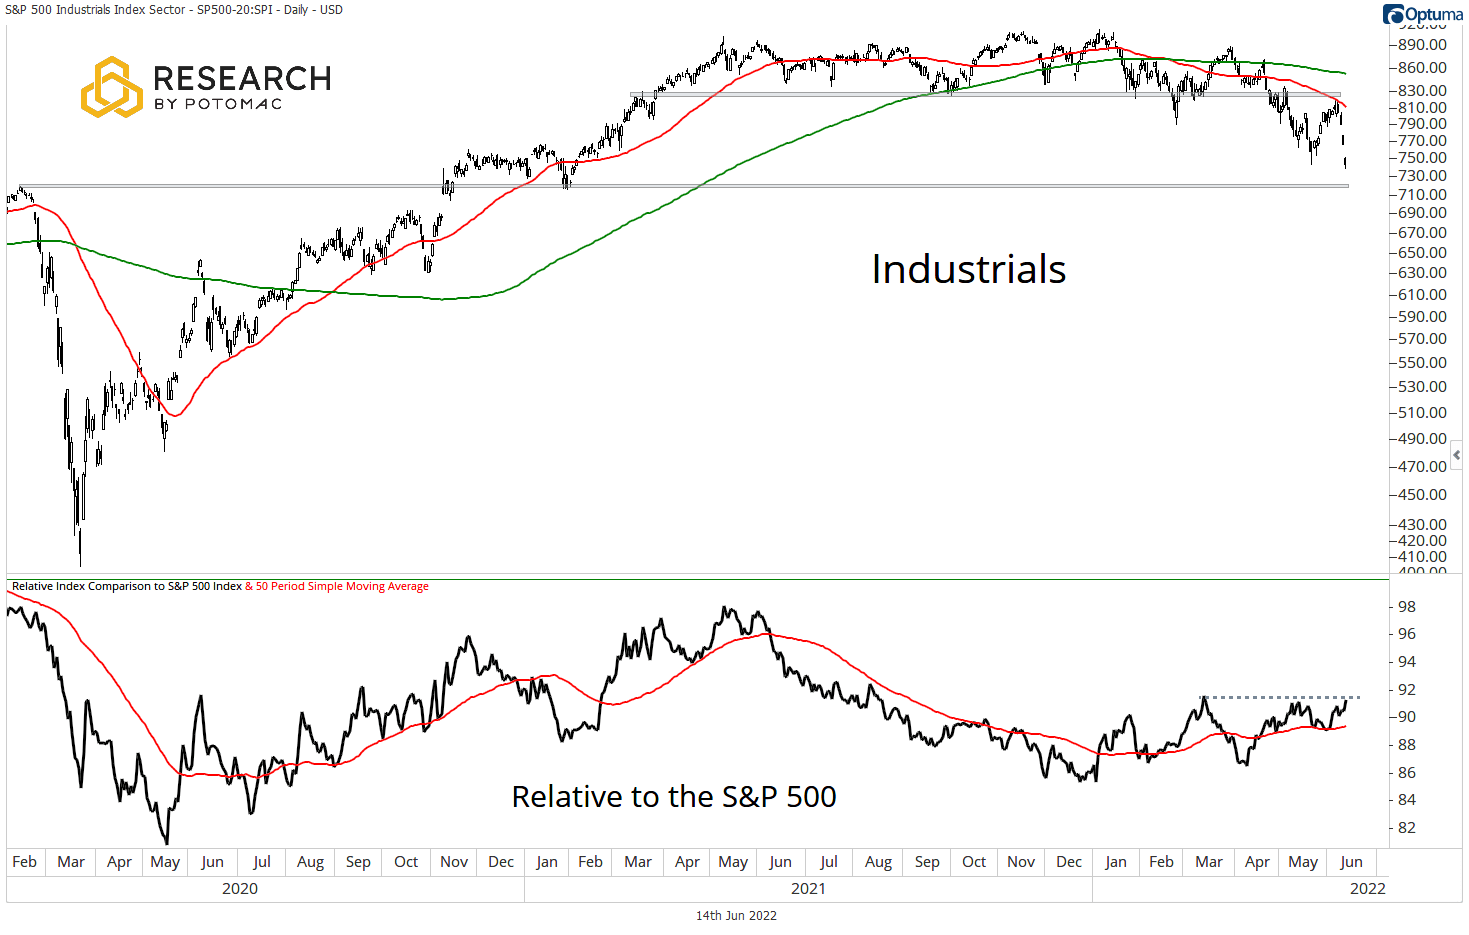 Growth vs Value (Large Cap) chart for March 25th research.